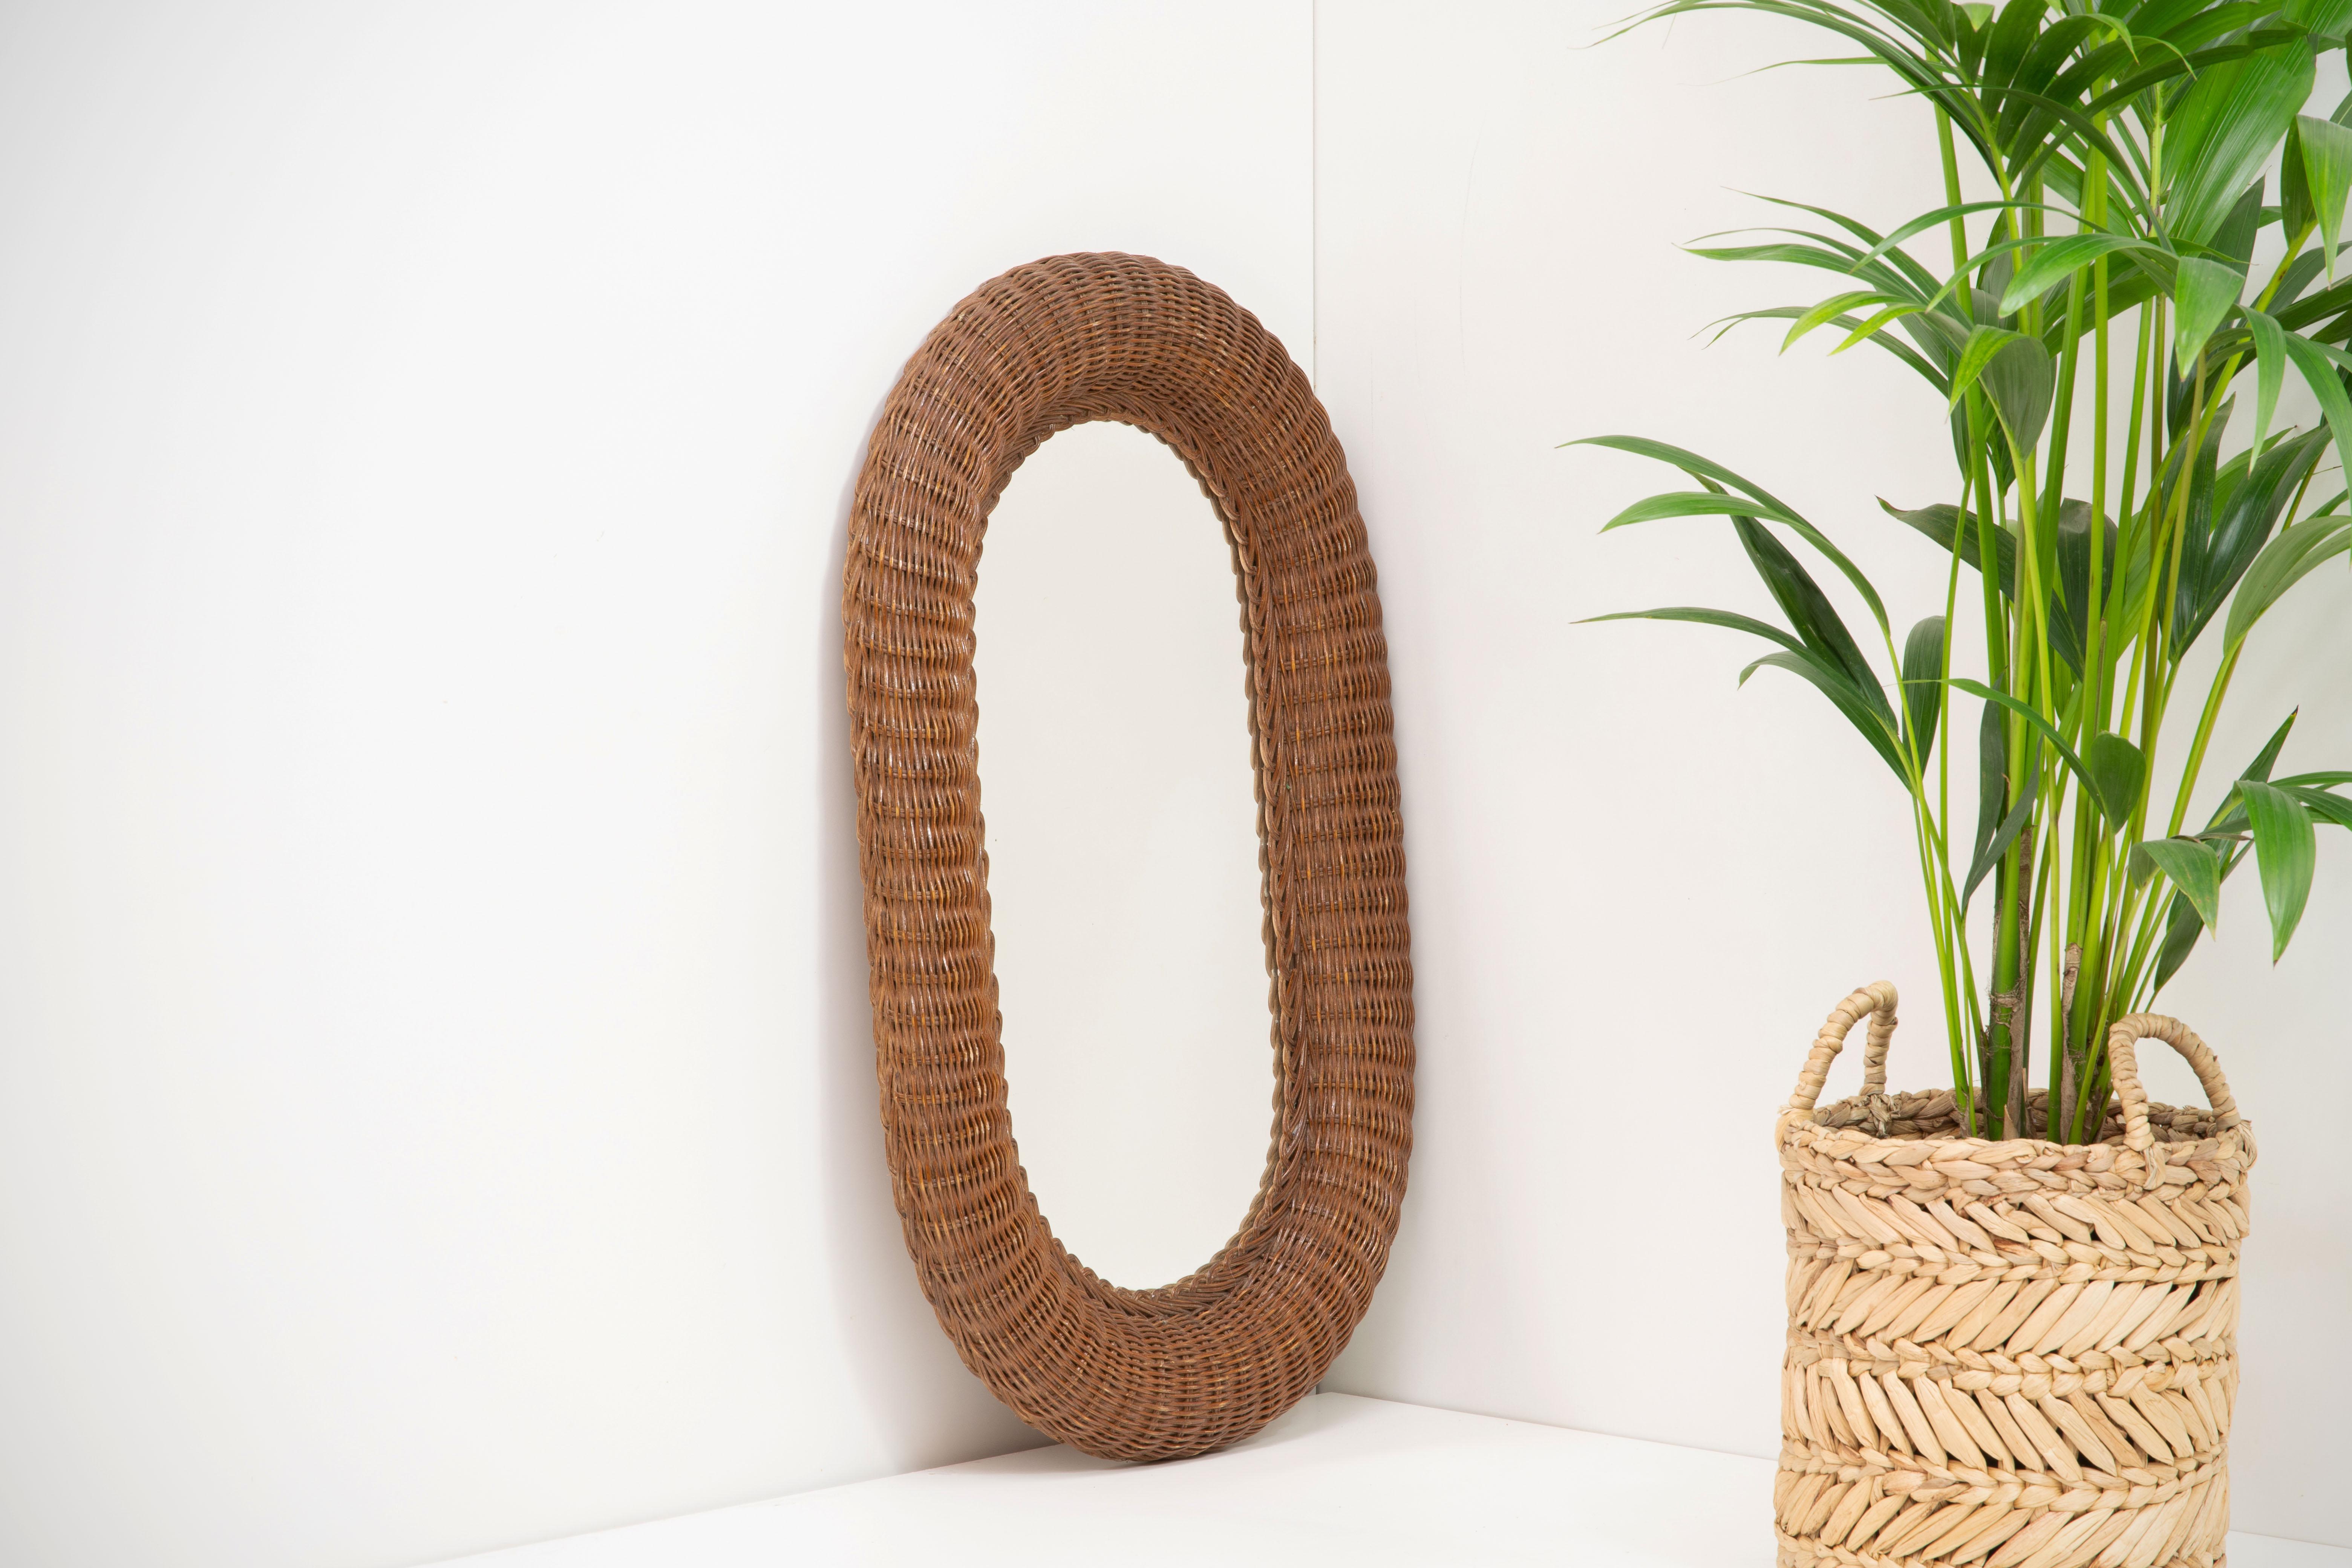 Oval French Organic Artisanal Rattan / Wicker mirror from the 1960s. Intricate design with various weaving patterns as well as wooden beads incorporated into the frame. Original mirror with minor wear. French Riviera

Other designers of the period